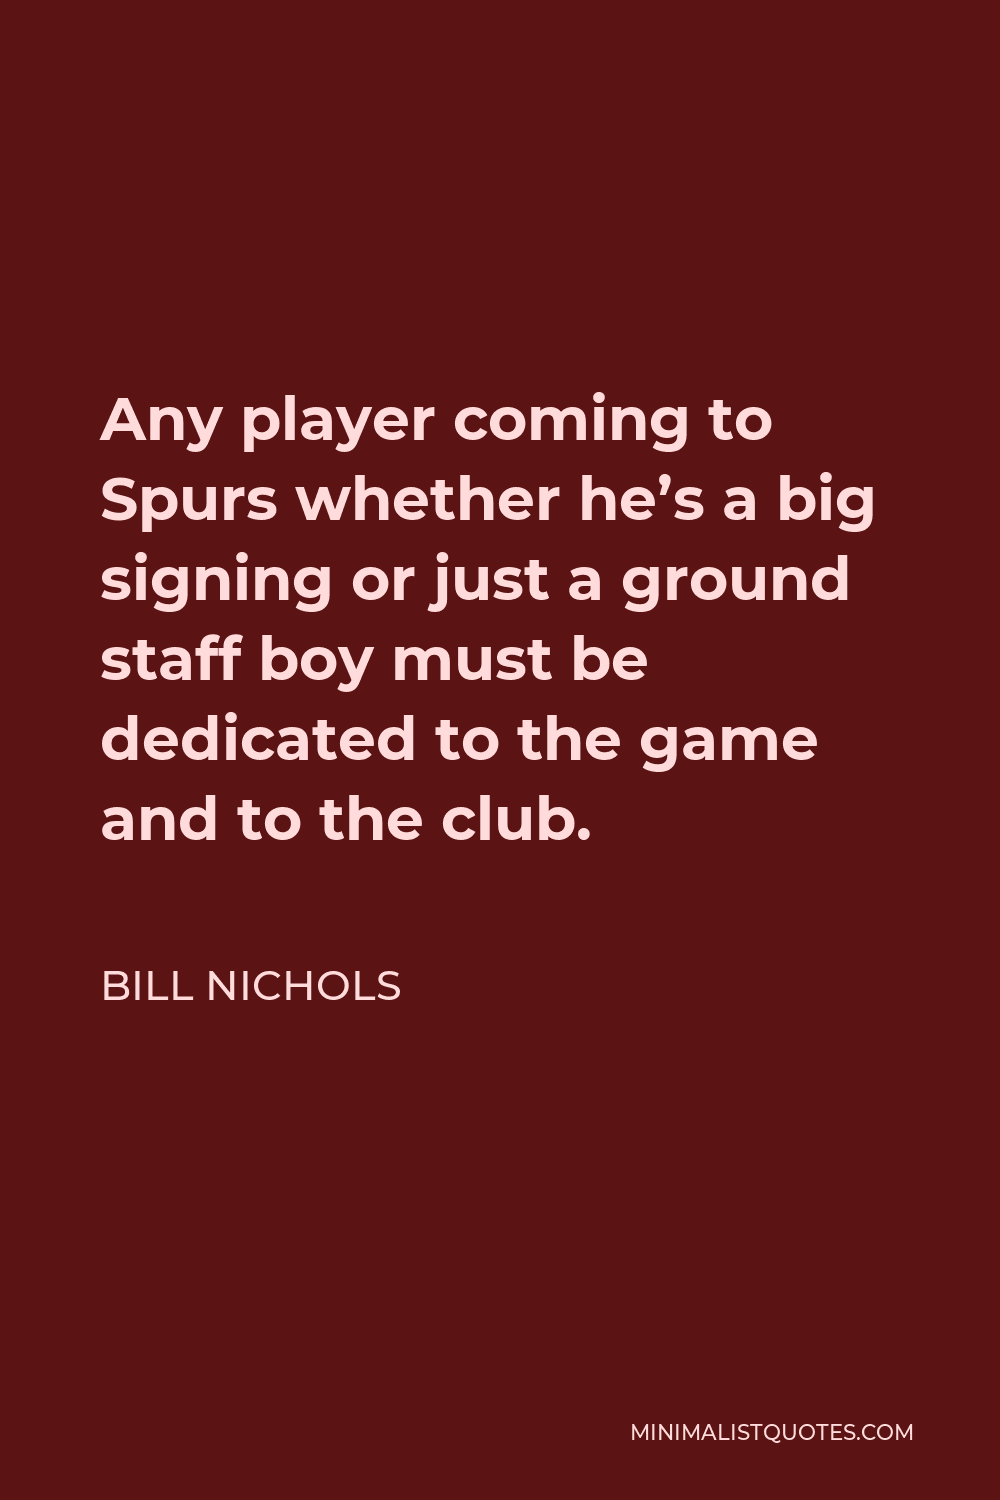 Bill Nichols Quote - Any player coming to Spurs whether he’s a big signing or just a ground staff boy must be dedicated to the game and to the club.